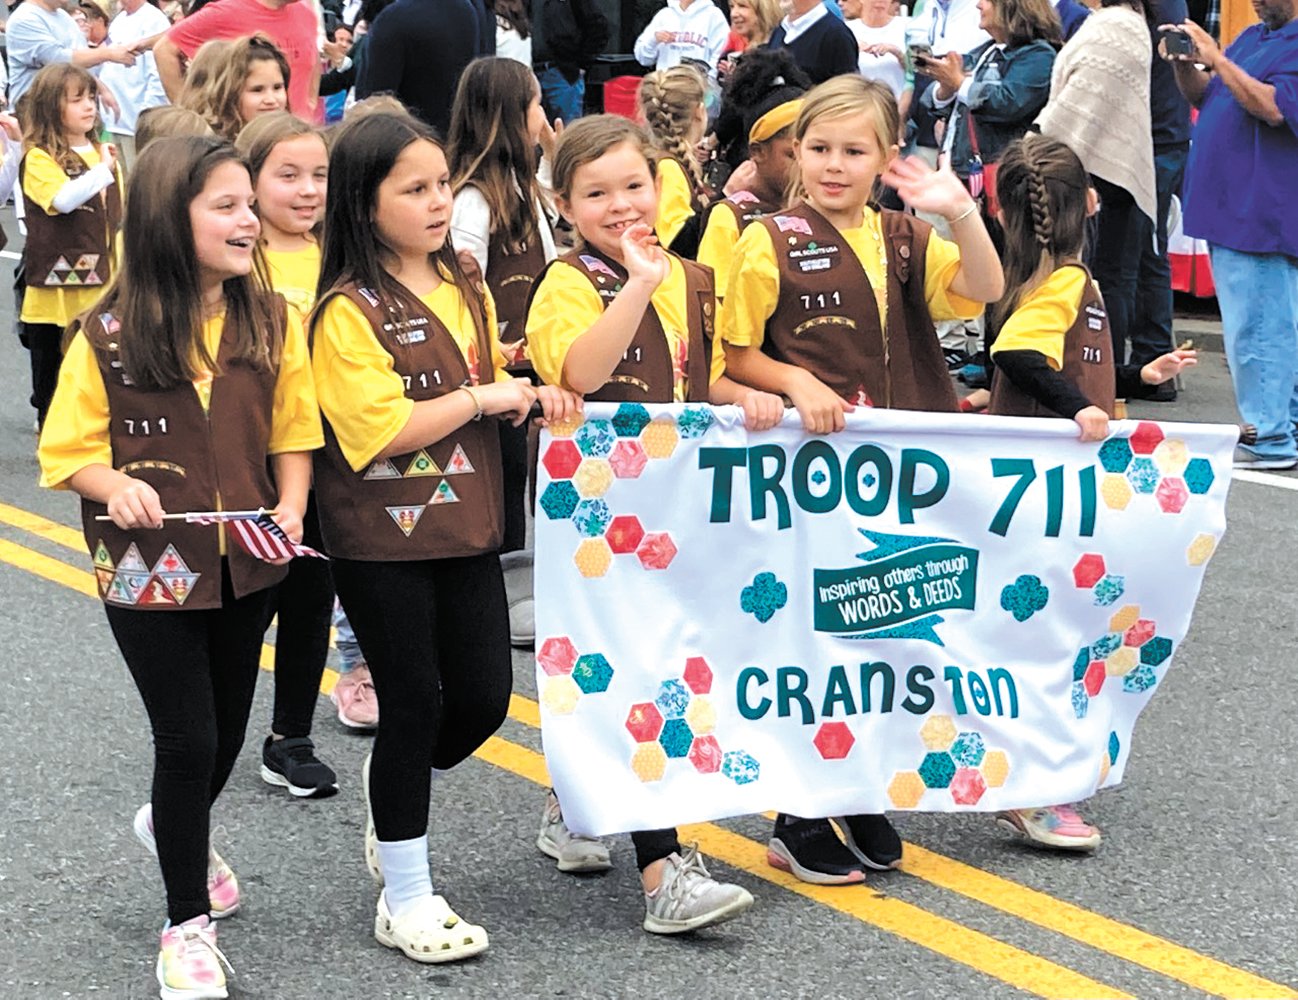 GIRL SCOUTS: Cranston’s Troop 711 participated in this past Friday’s parade and waved to those in the crowd. (Herald photos)